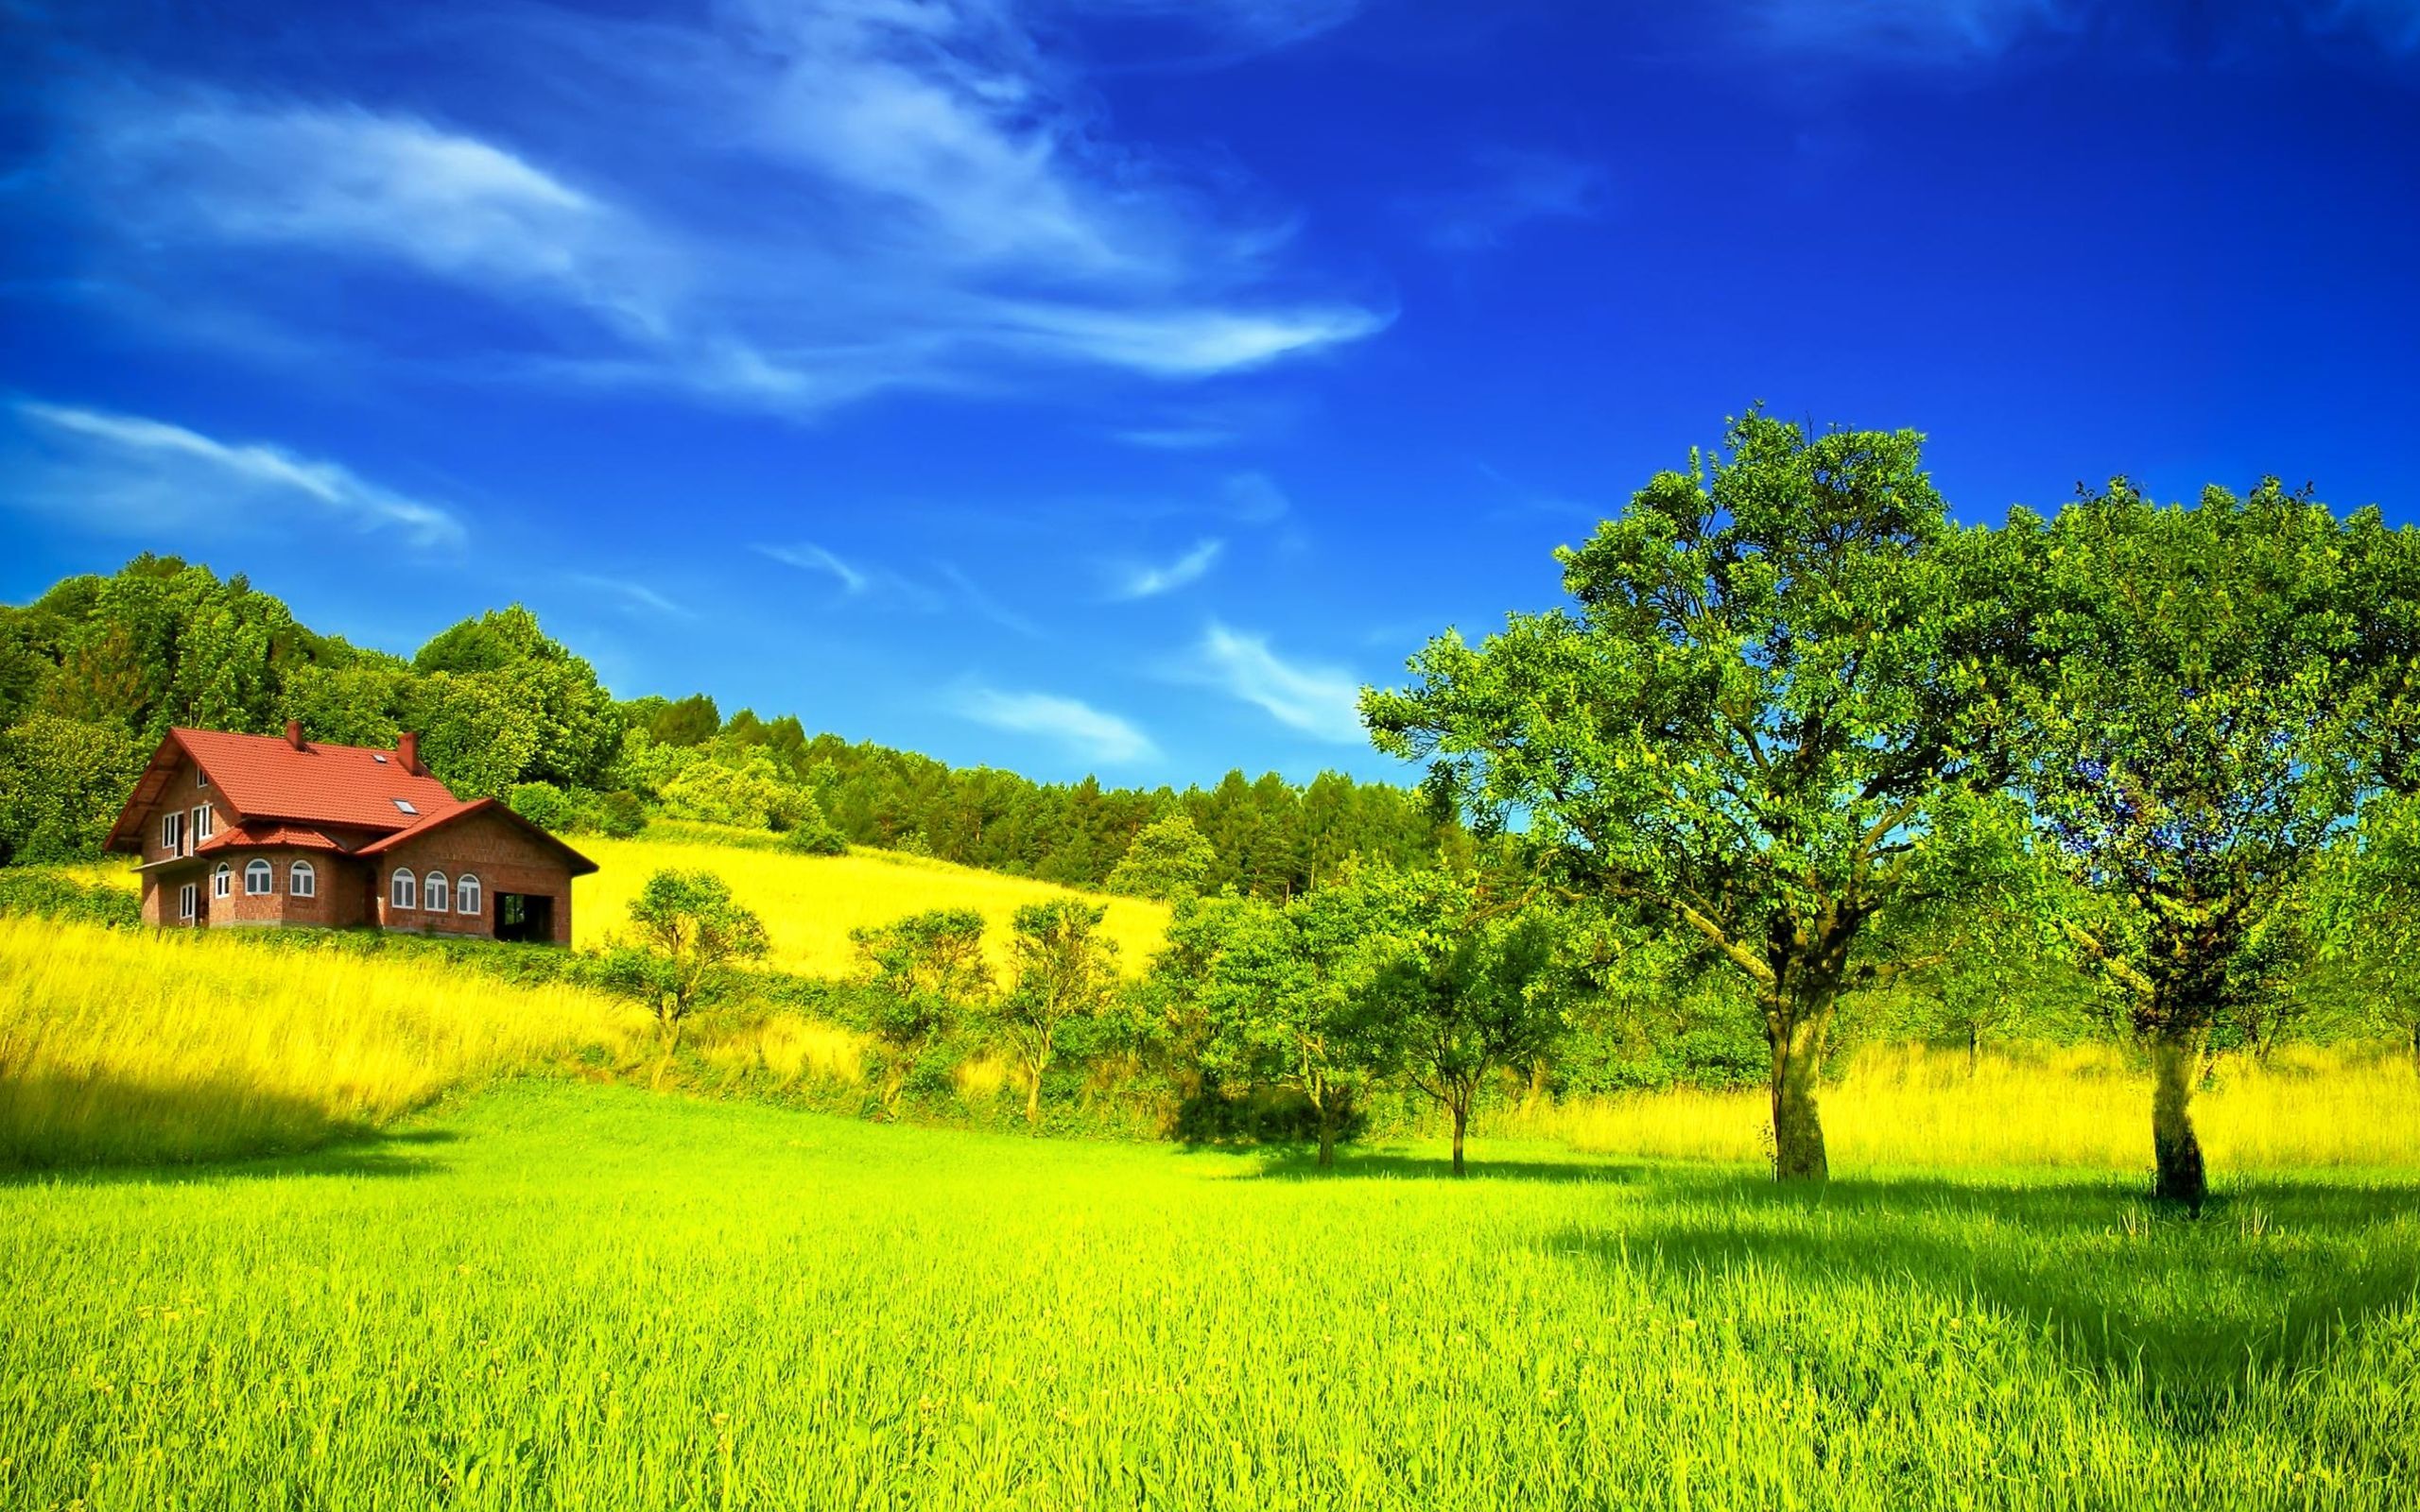 Dream Summer 2012 - peaceful place Wallpapers - HD Wallpapers 96355